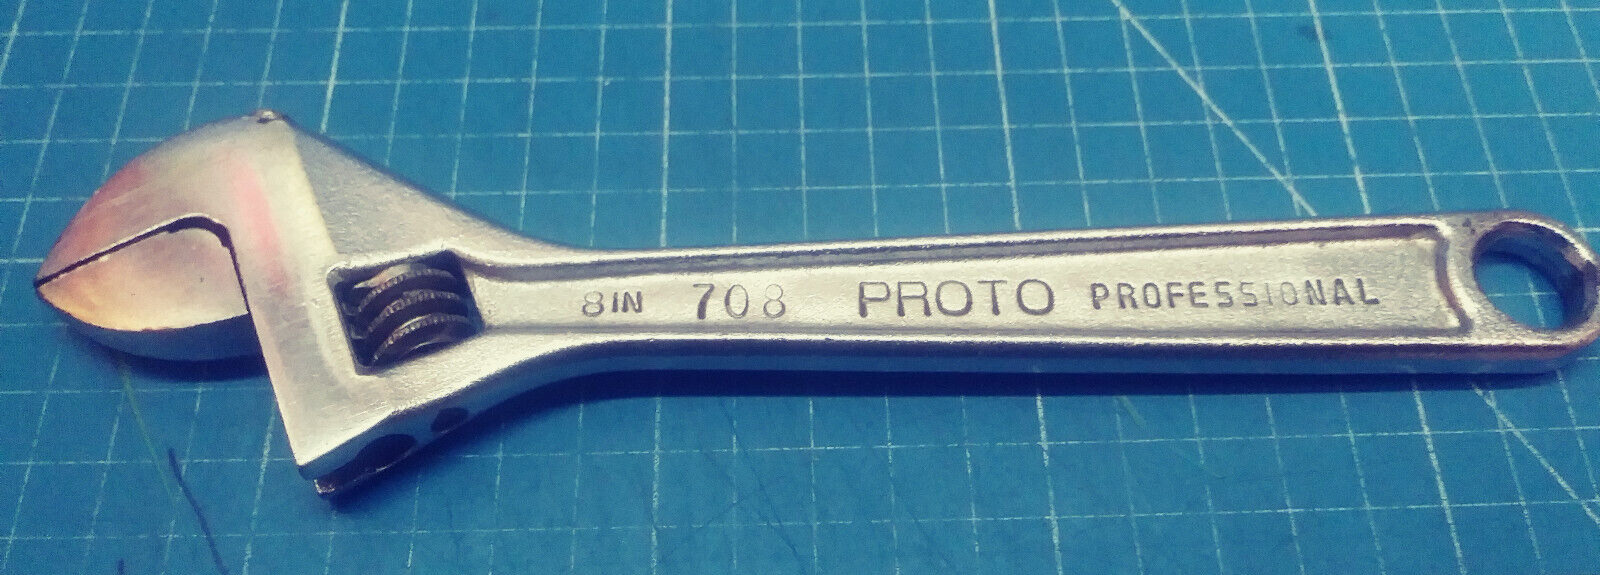 Proto Professional Tools 8 in 200mm Adjustable Wrench # 708 Made in the USA